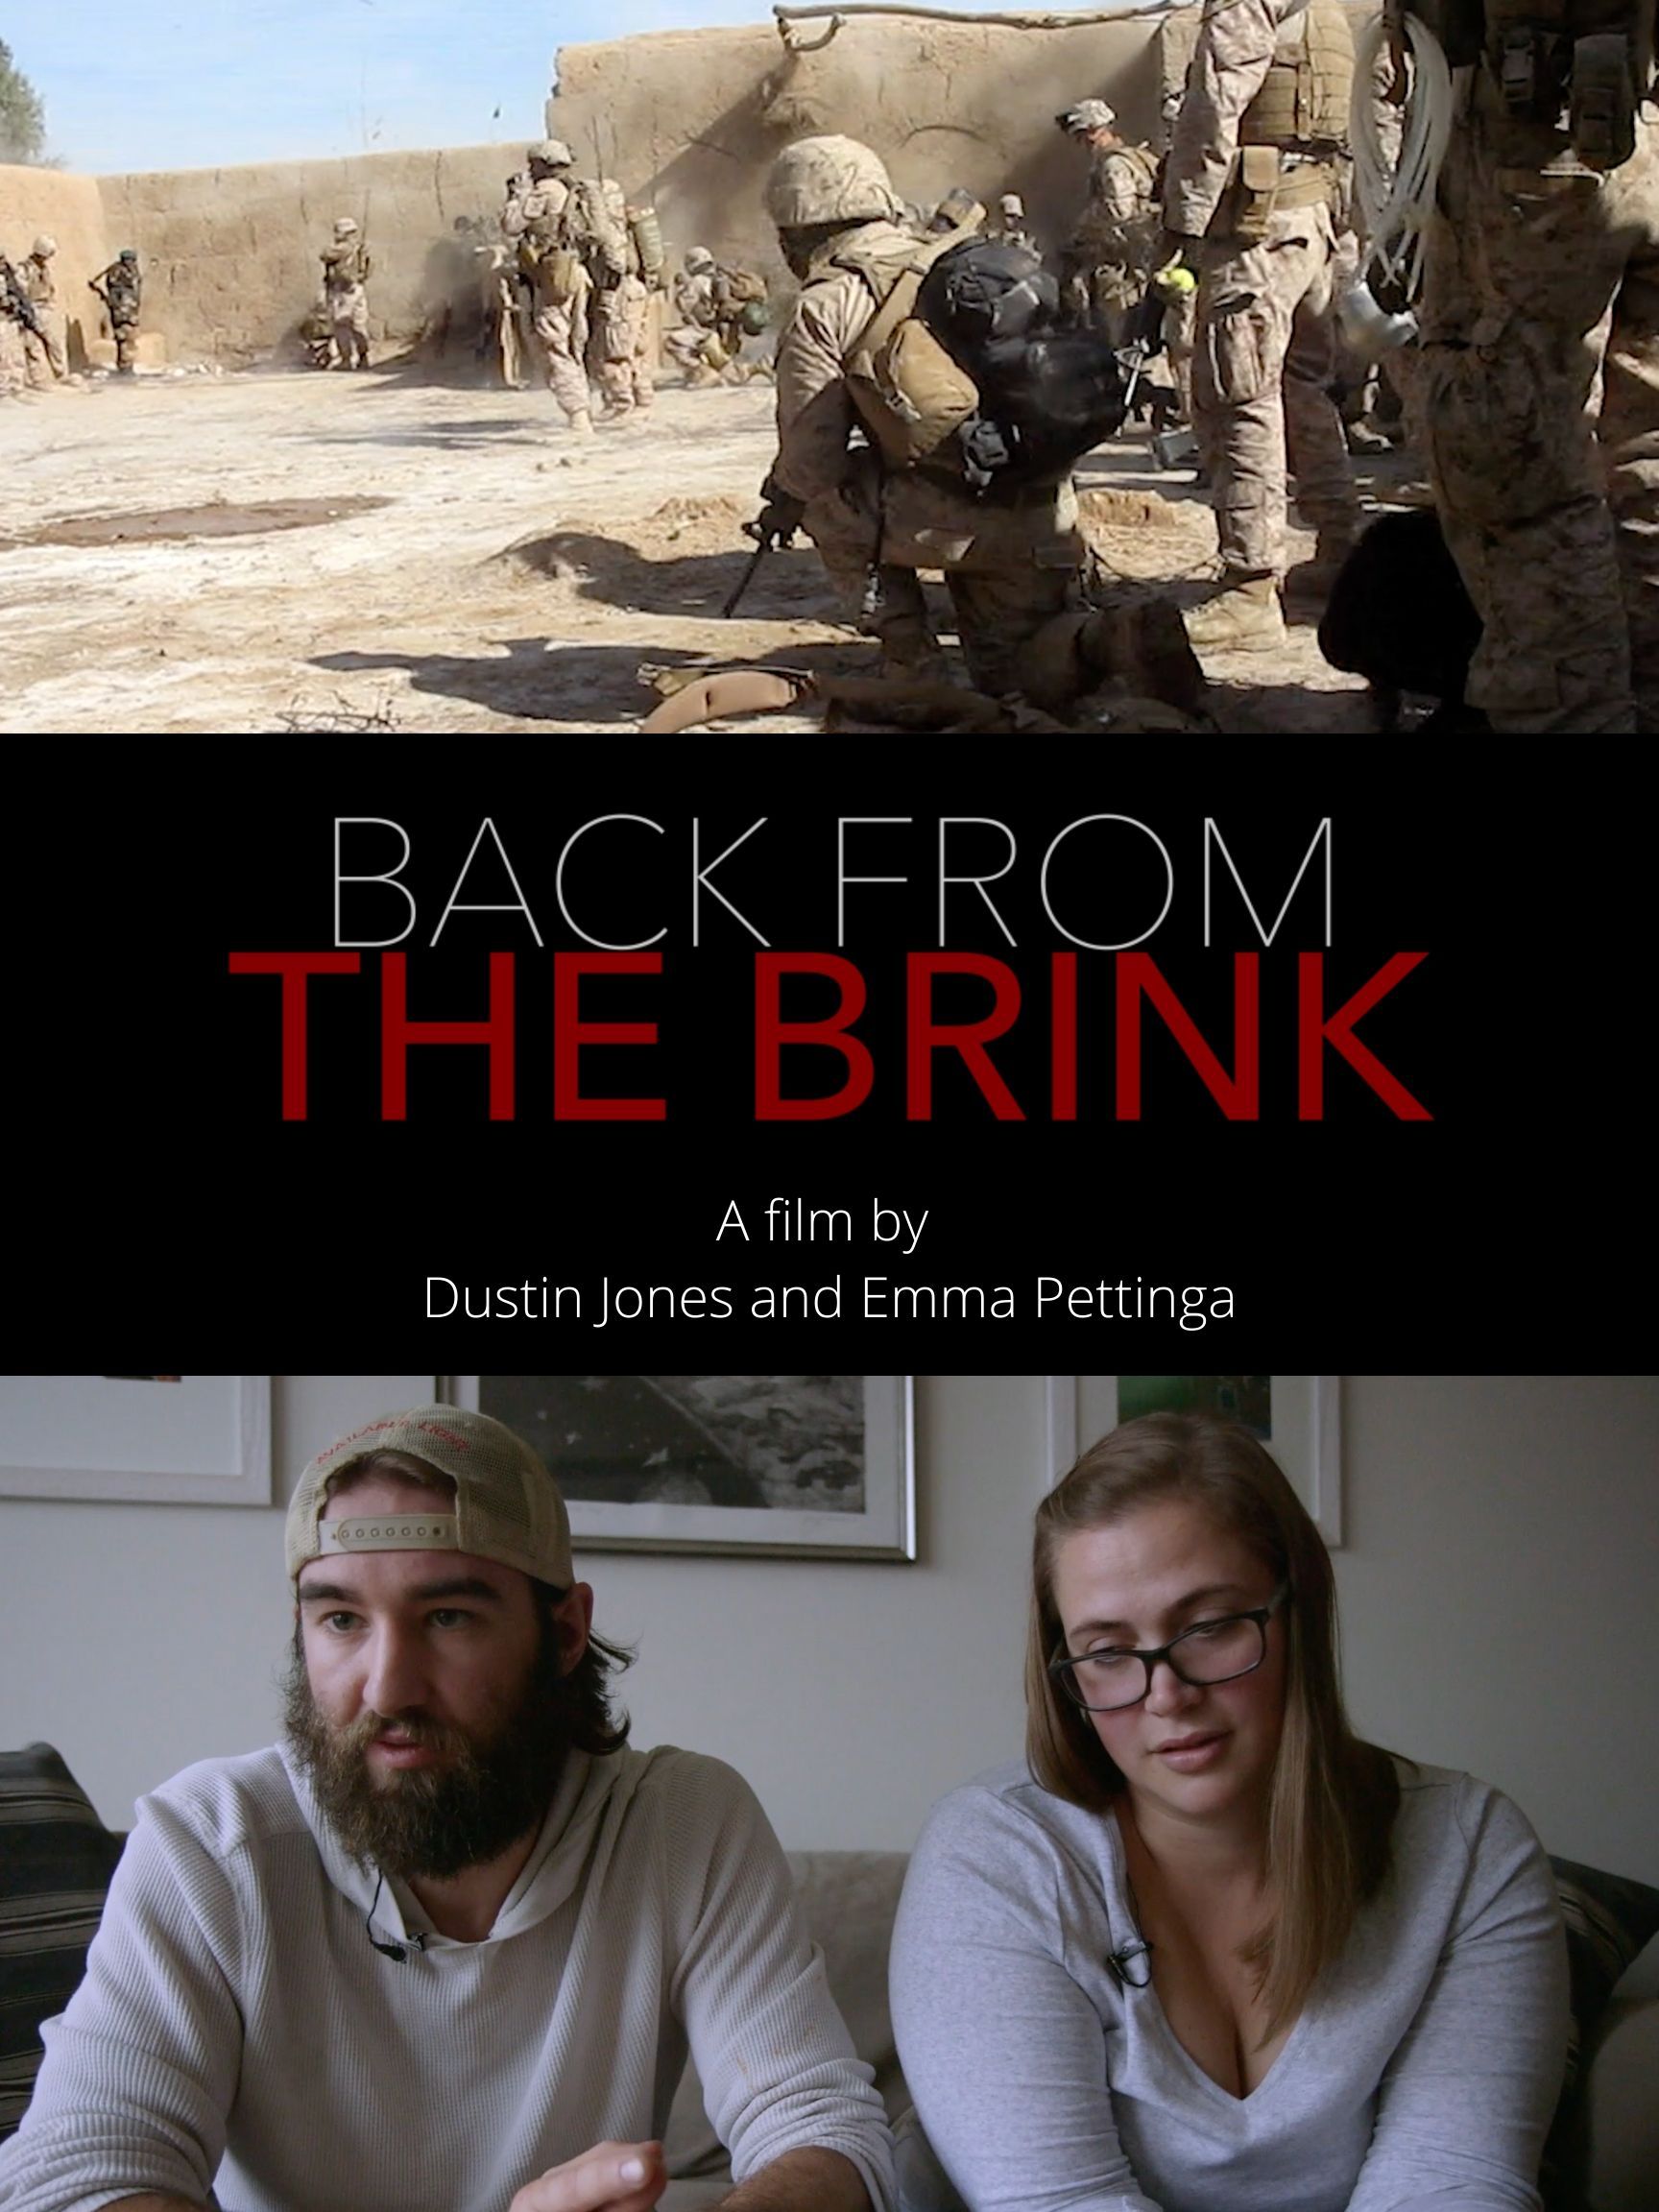 Back From the Brink: An After War Story will be shown at several in-person film festivals as well as online screening events. Image courtesy of Dustin Jones.